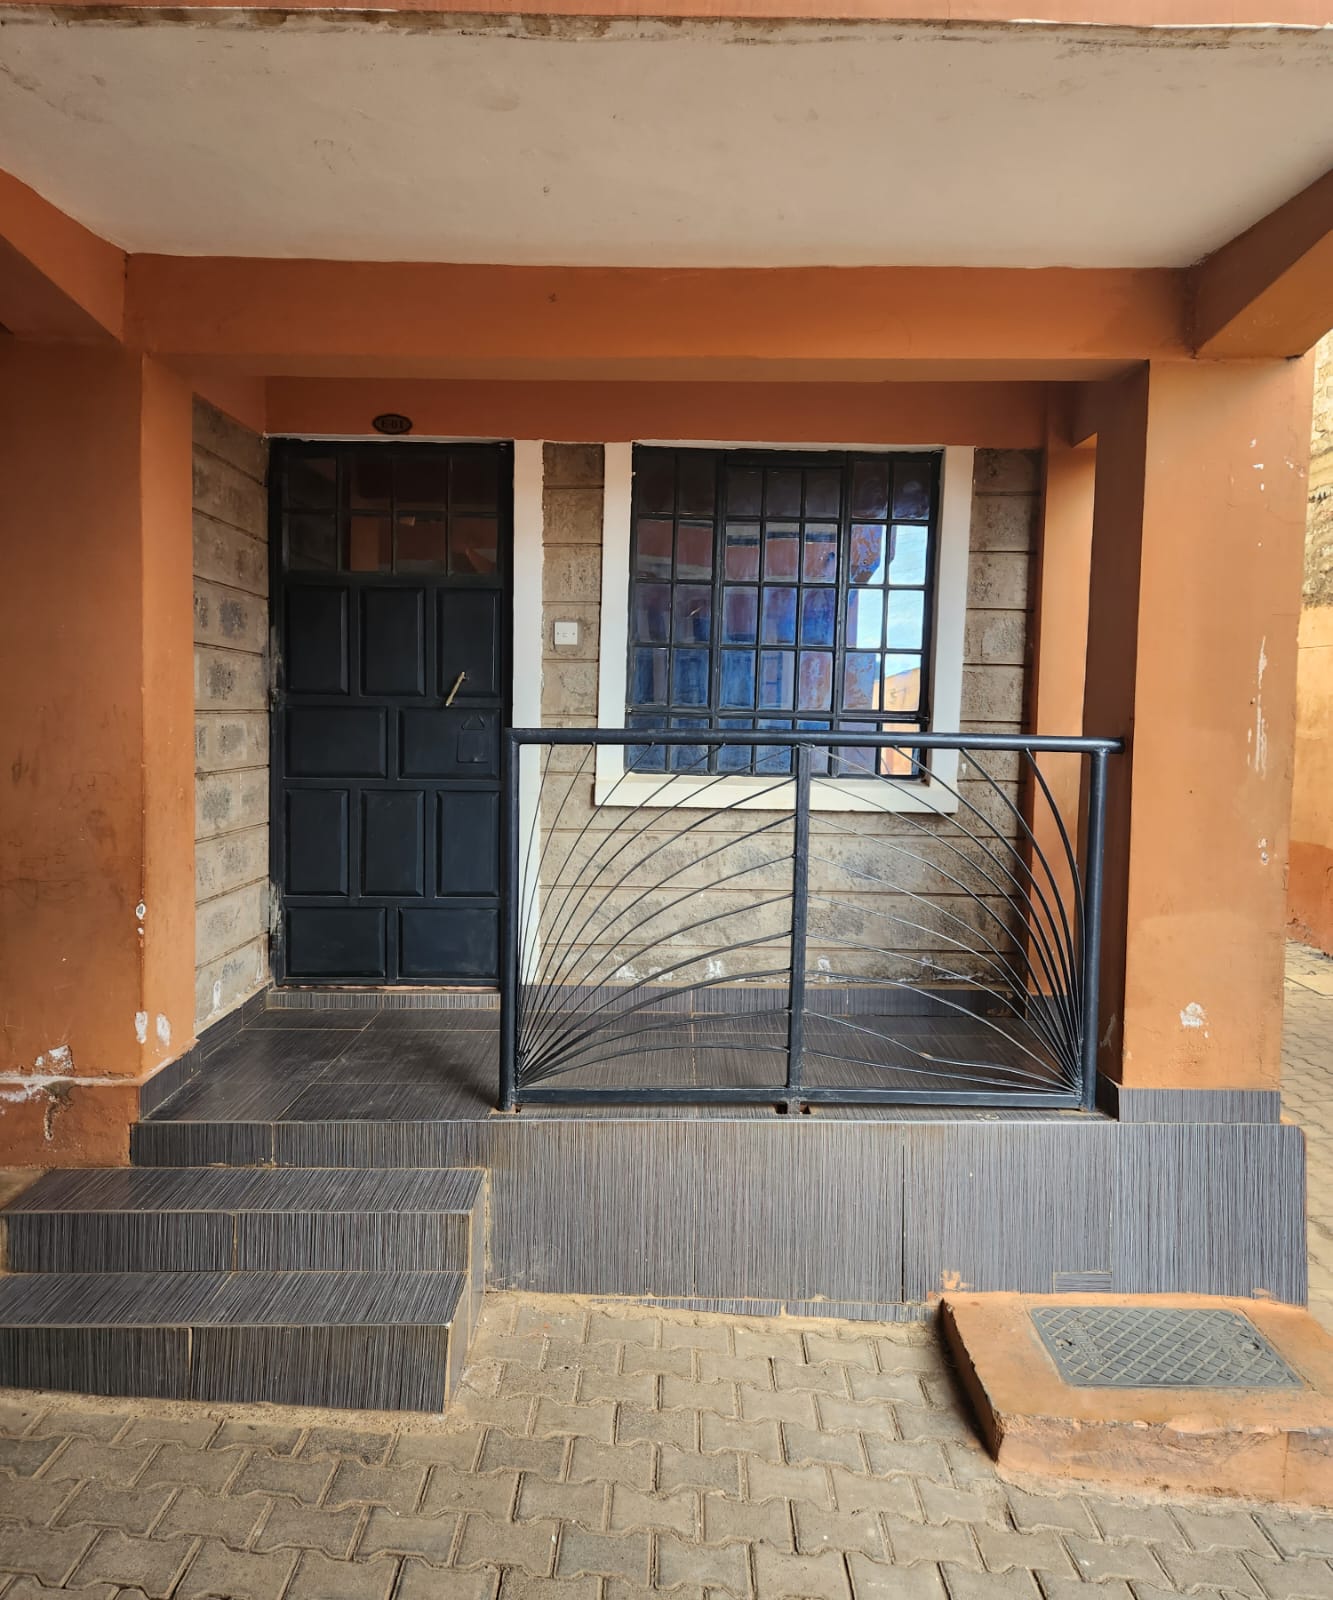 Commercial Property sits on 3/4 acre in Amboseli, off Lavington. Total rental income: *2,115,500 p/m. Property has bedsitters, 1 and 2 bedrooms Musilli Homes